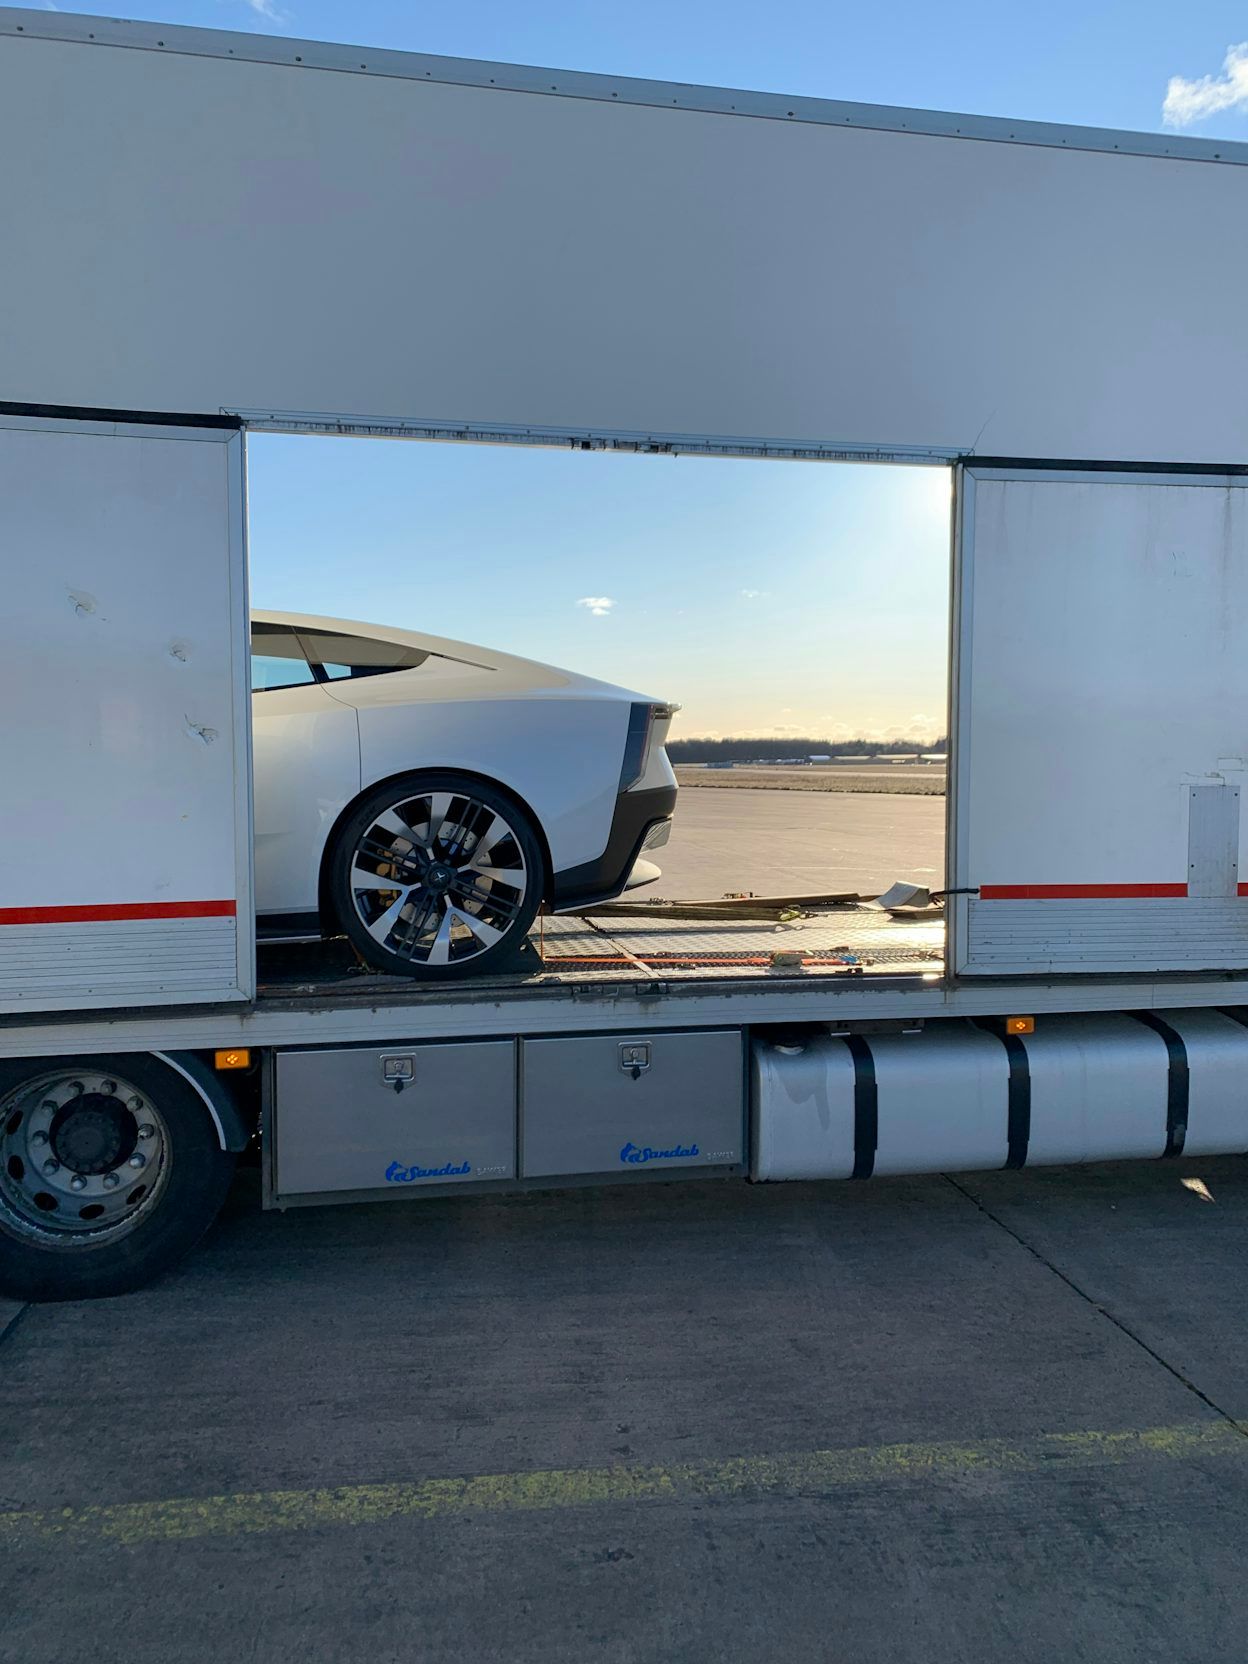 The rear of a Polestar on a image displayed on a truck.